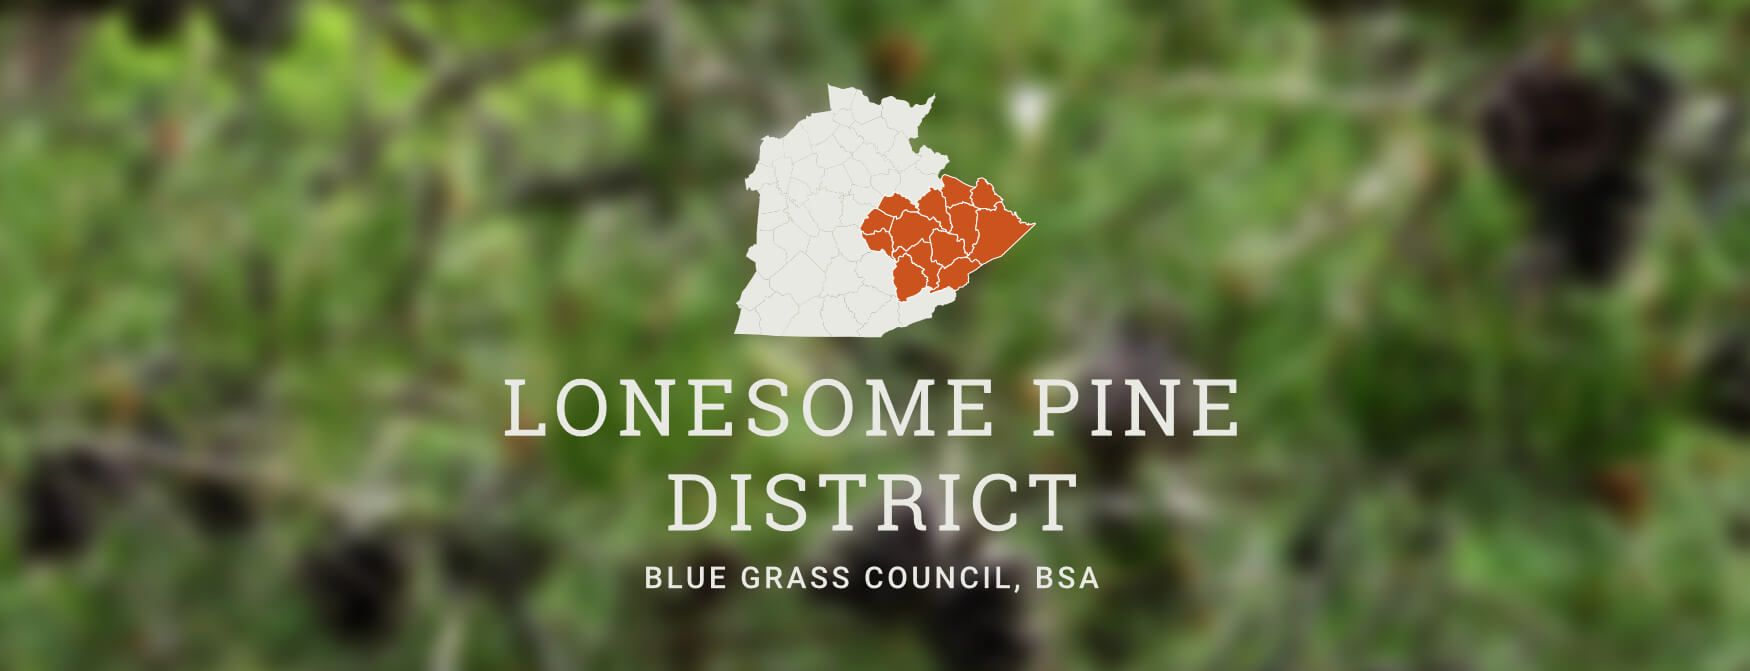 Lonesome Pine District